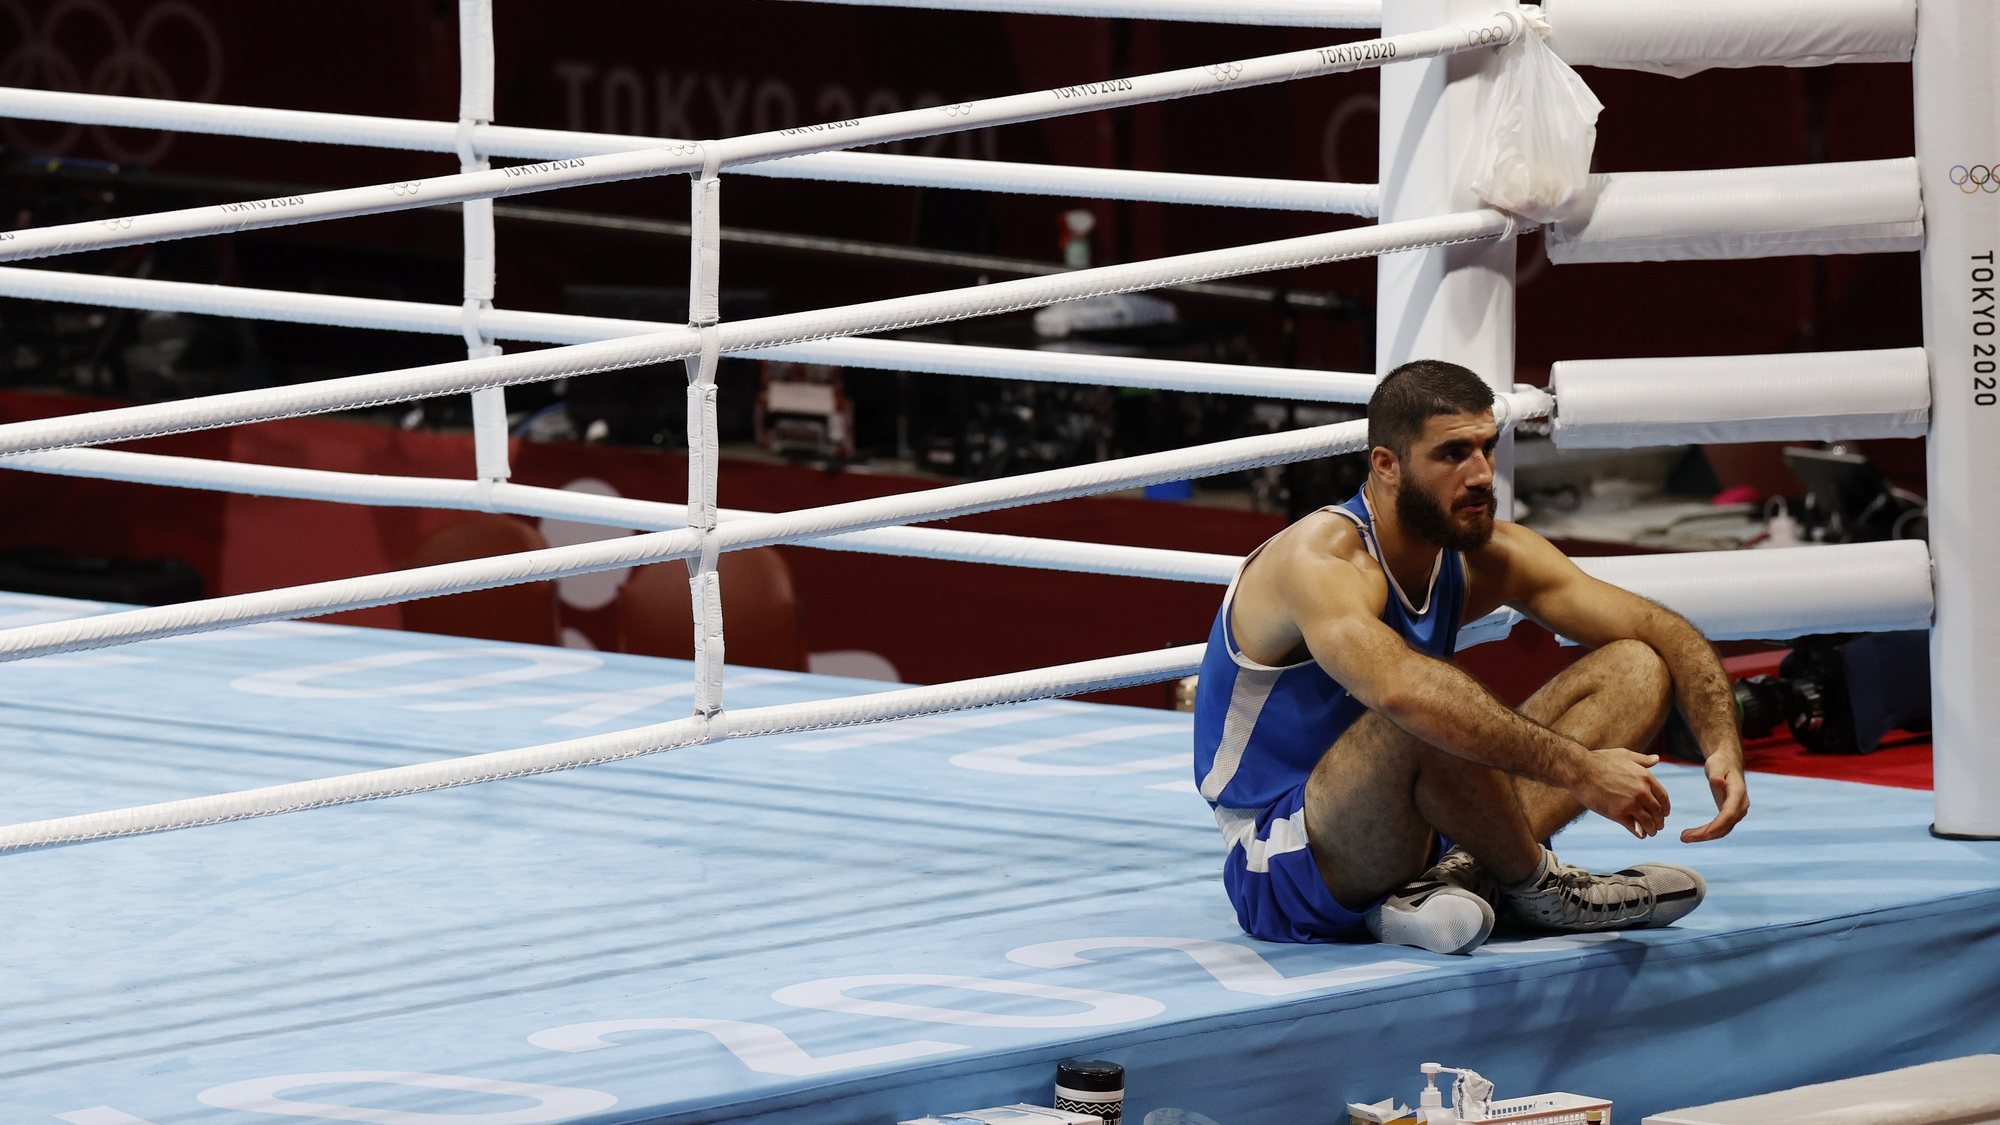 epa09383986 Mourad Aliev of France sits outside the ring in protest after losing his match against Frazer Clarke of Great Britain in the Men&#039;s Super Heavy (+91kg) quarterfinal match of the Boxing events of the Tokyo 2020 Olympic Games at the Ryogoku Kokugikan Arena in Tokyo, Japan, 01 August 2021.  EPA/RUNGROJ YONGRIT